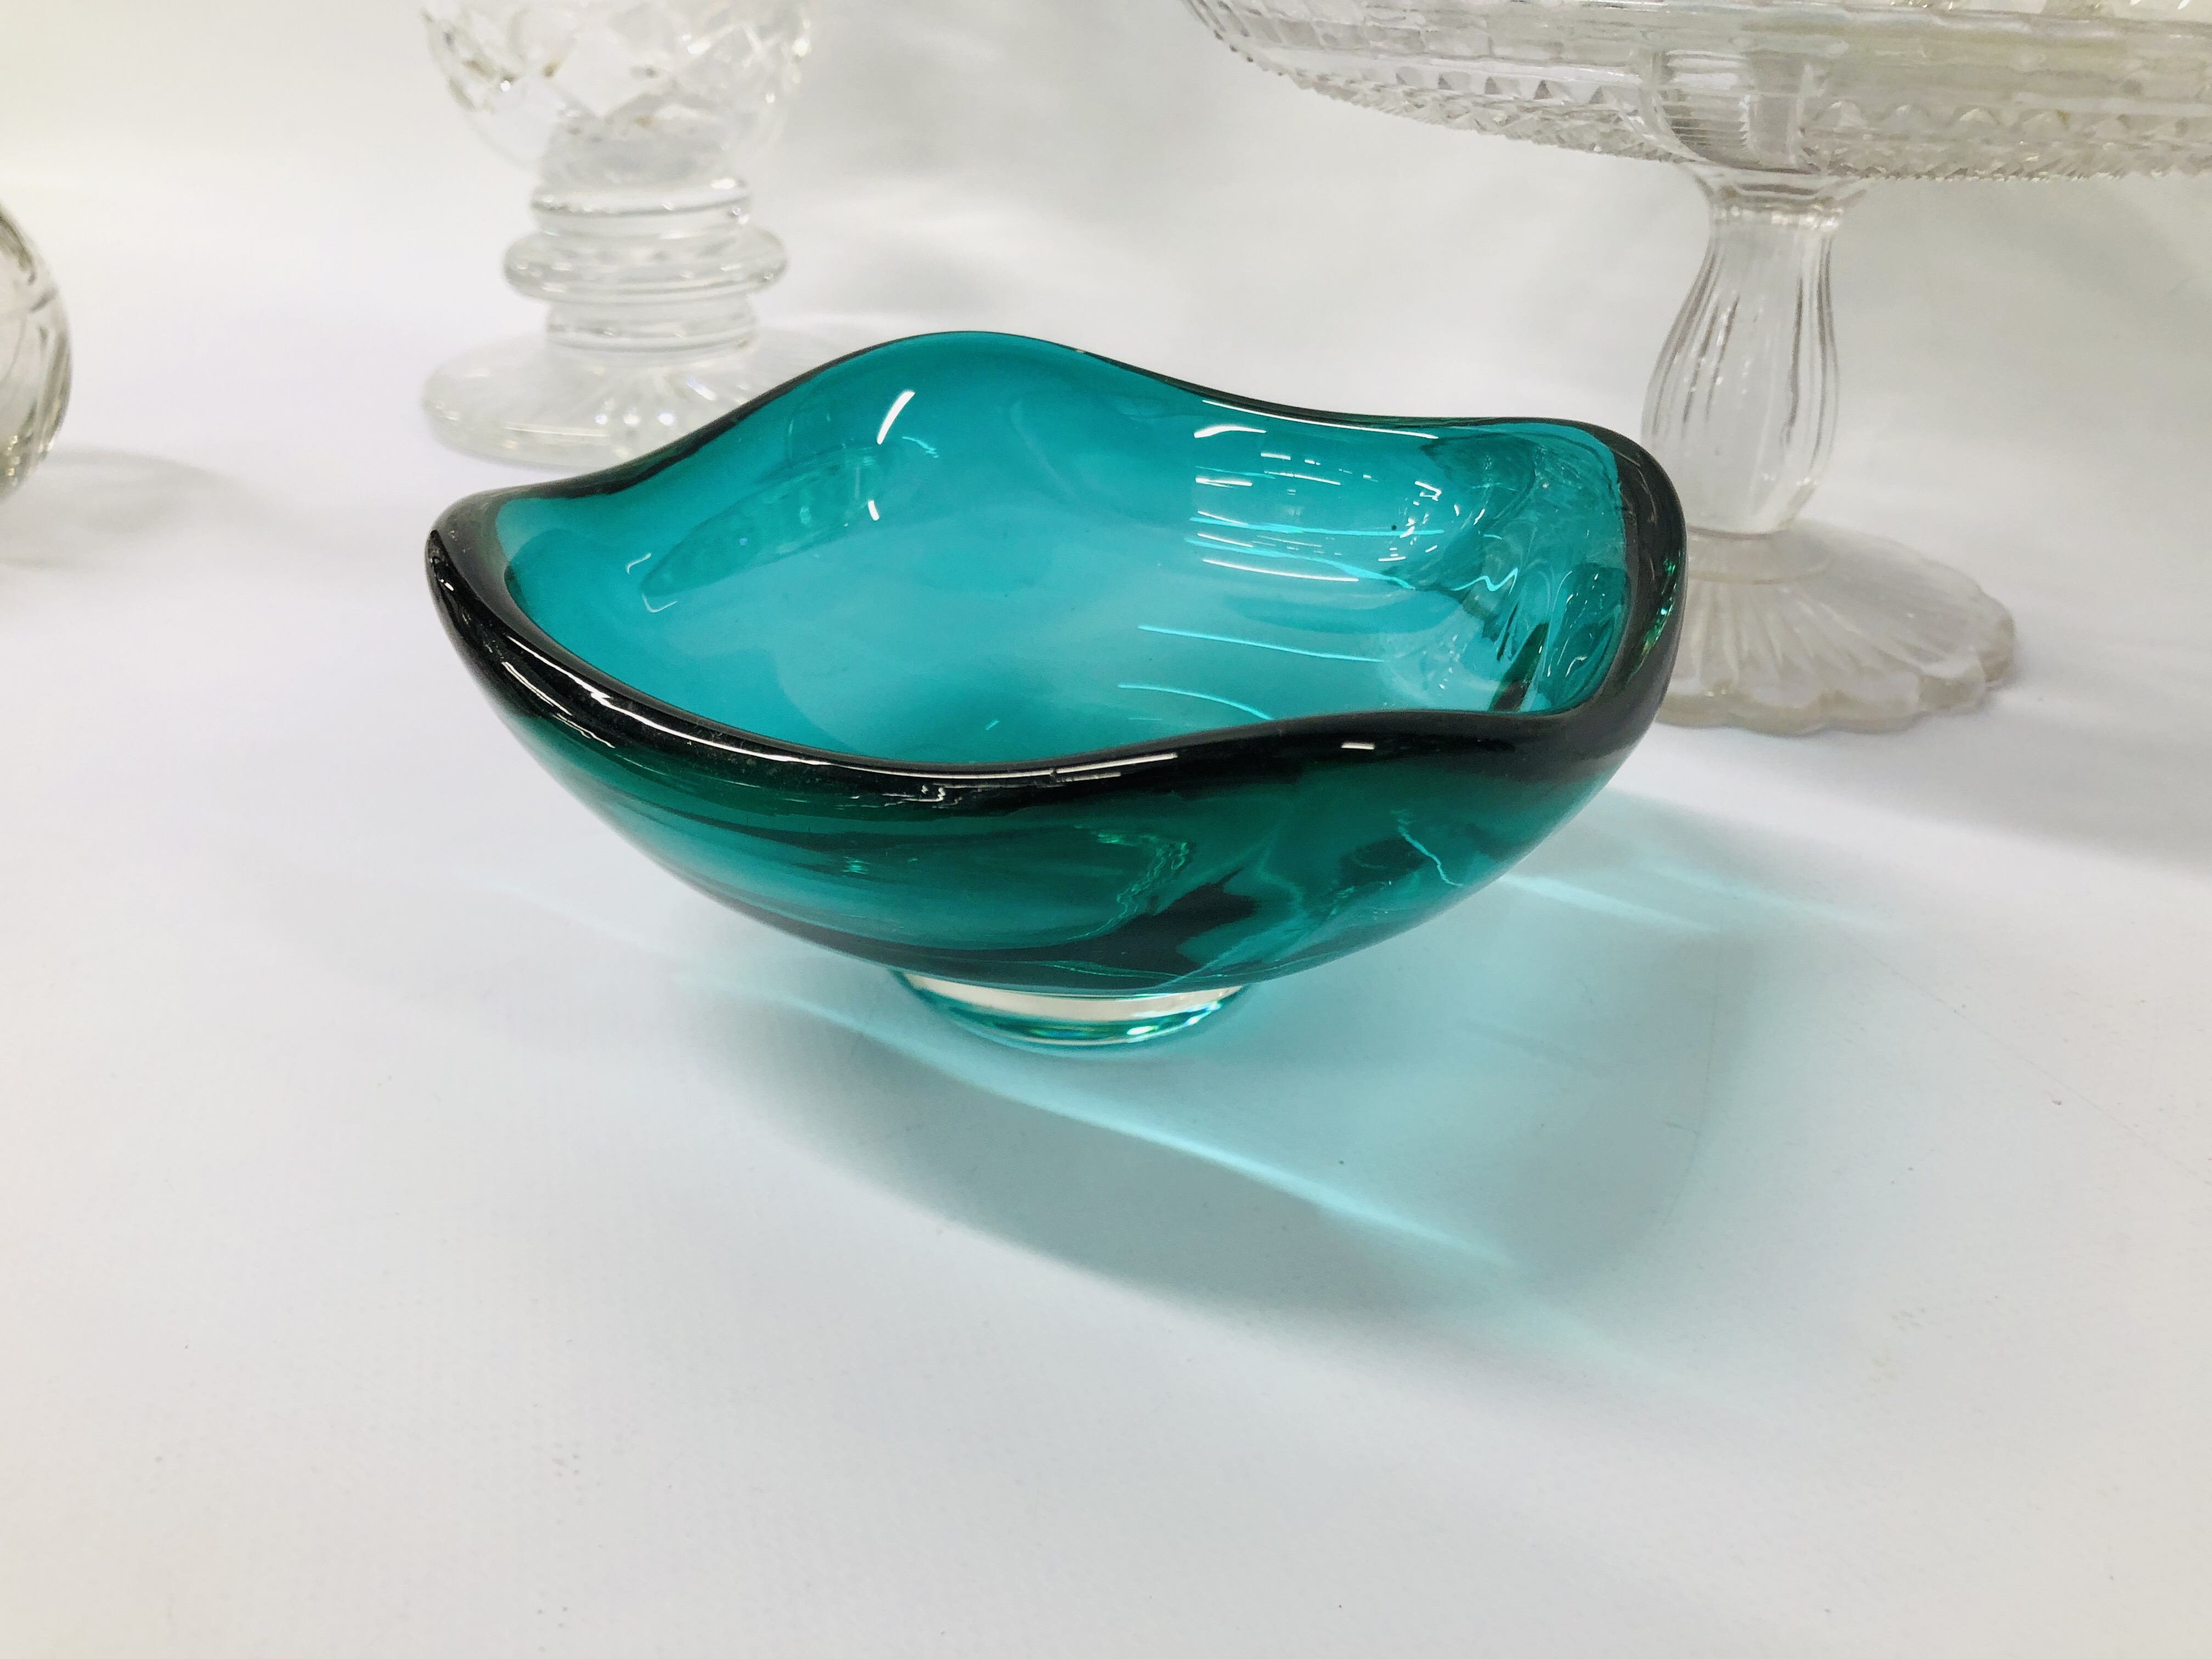 COLLECTION OF GLASSWARE TO INCLUDE VINTAGE DECANTERS, CAKE STAND, BLUE GLASS VASE, - Image 11 of 20